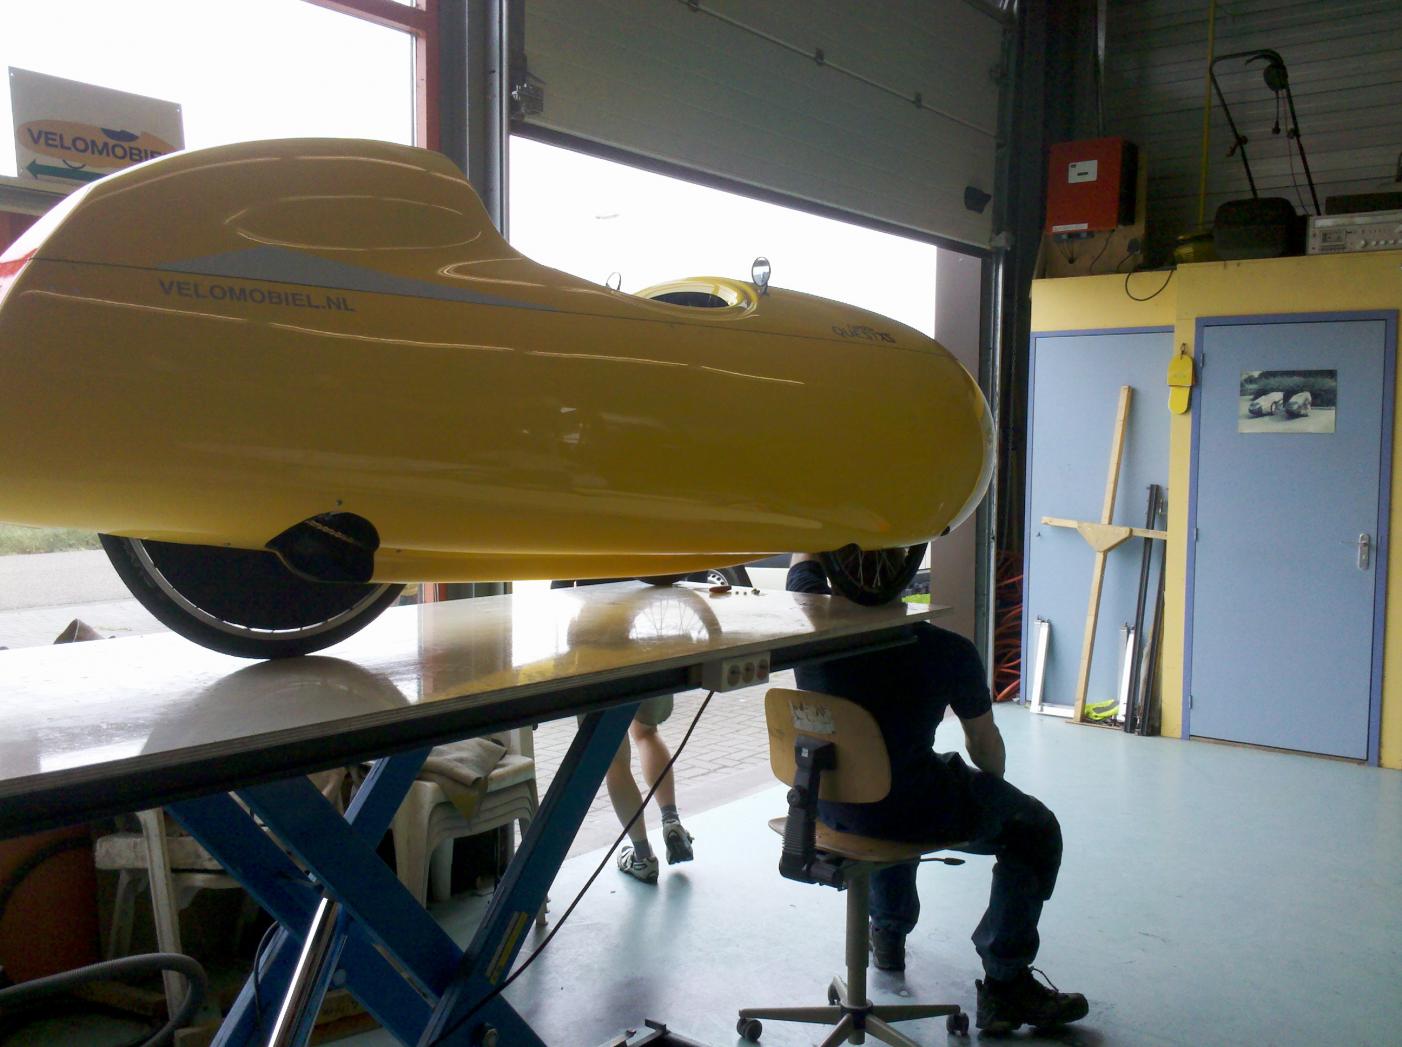 My Quest being finished at velomobiel.nl